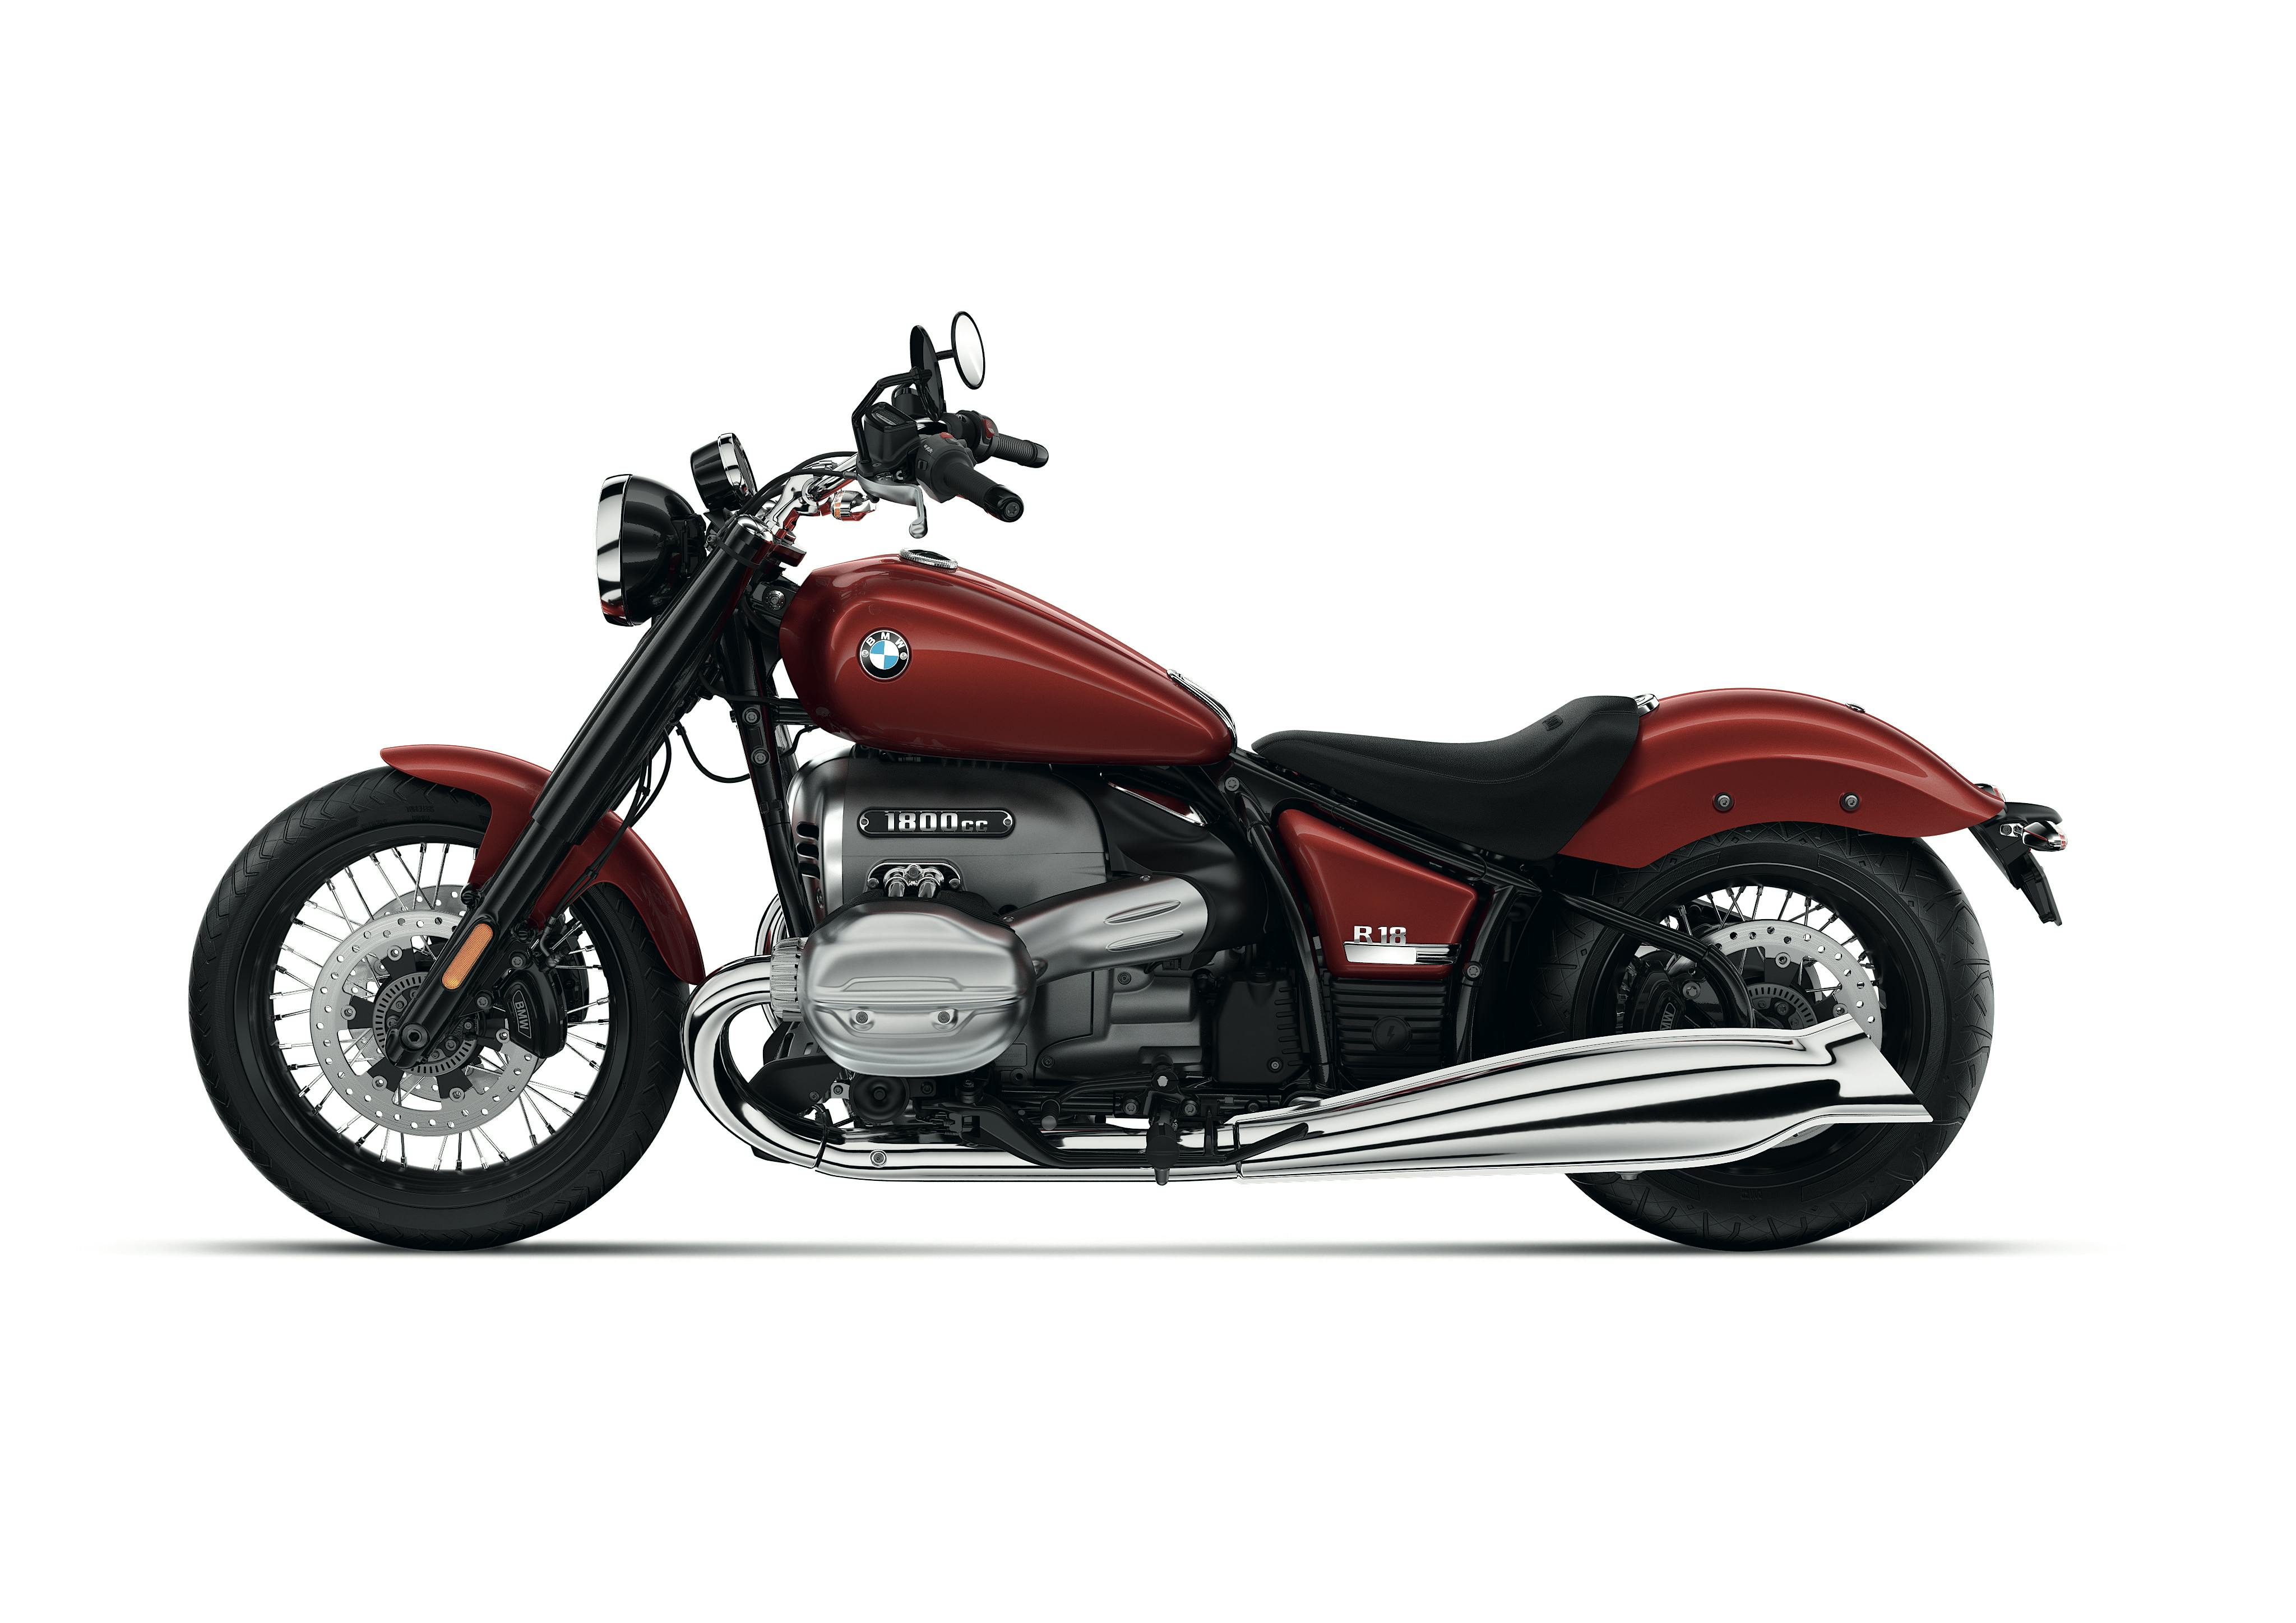 BMW R 18 in Mars Red Metallic colour